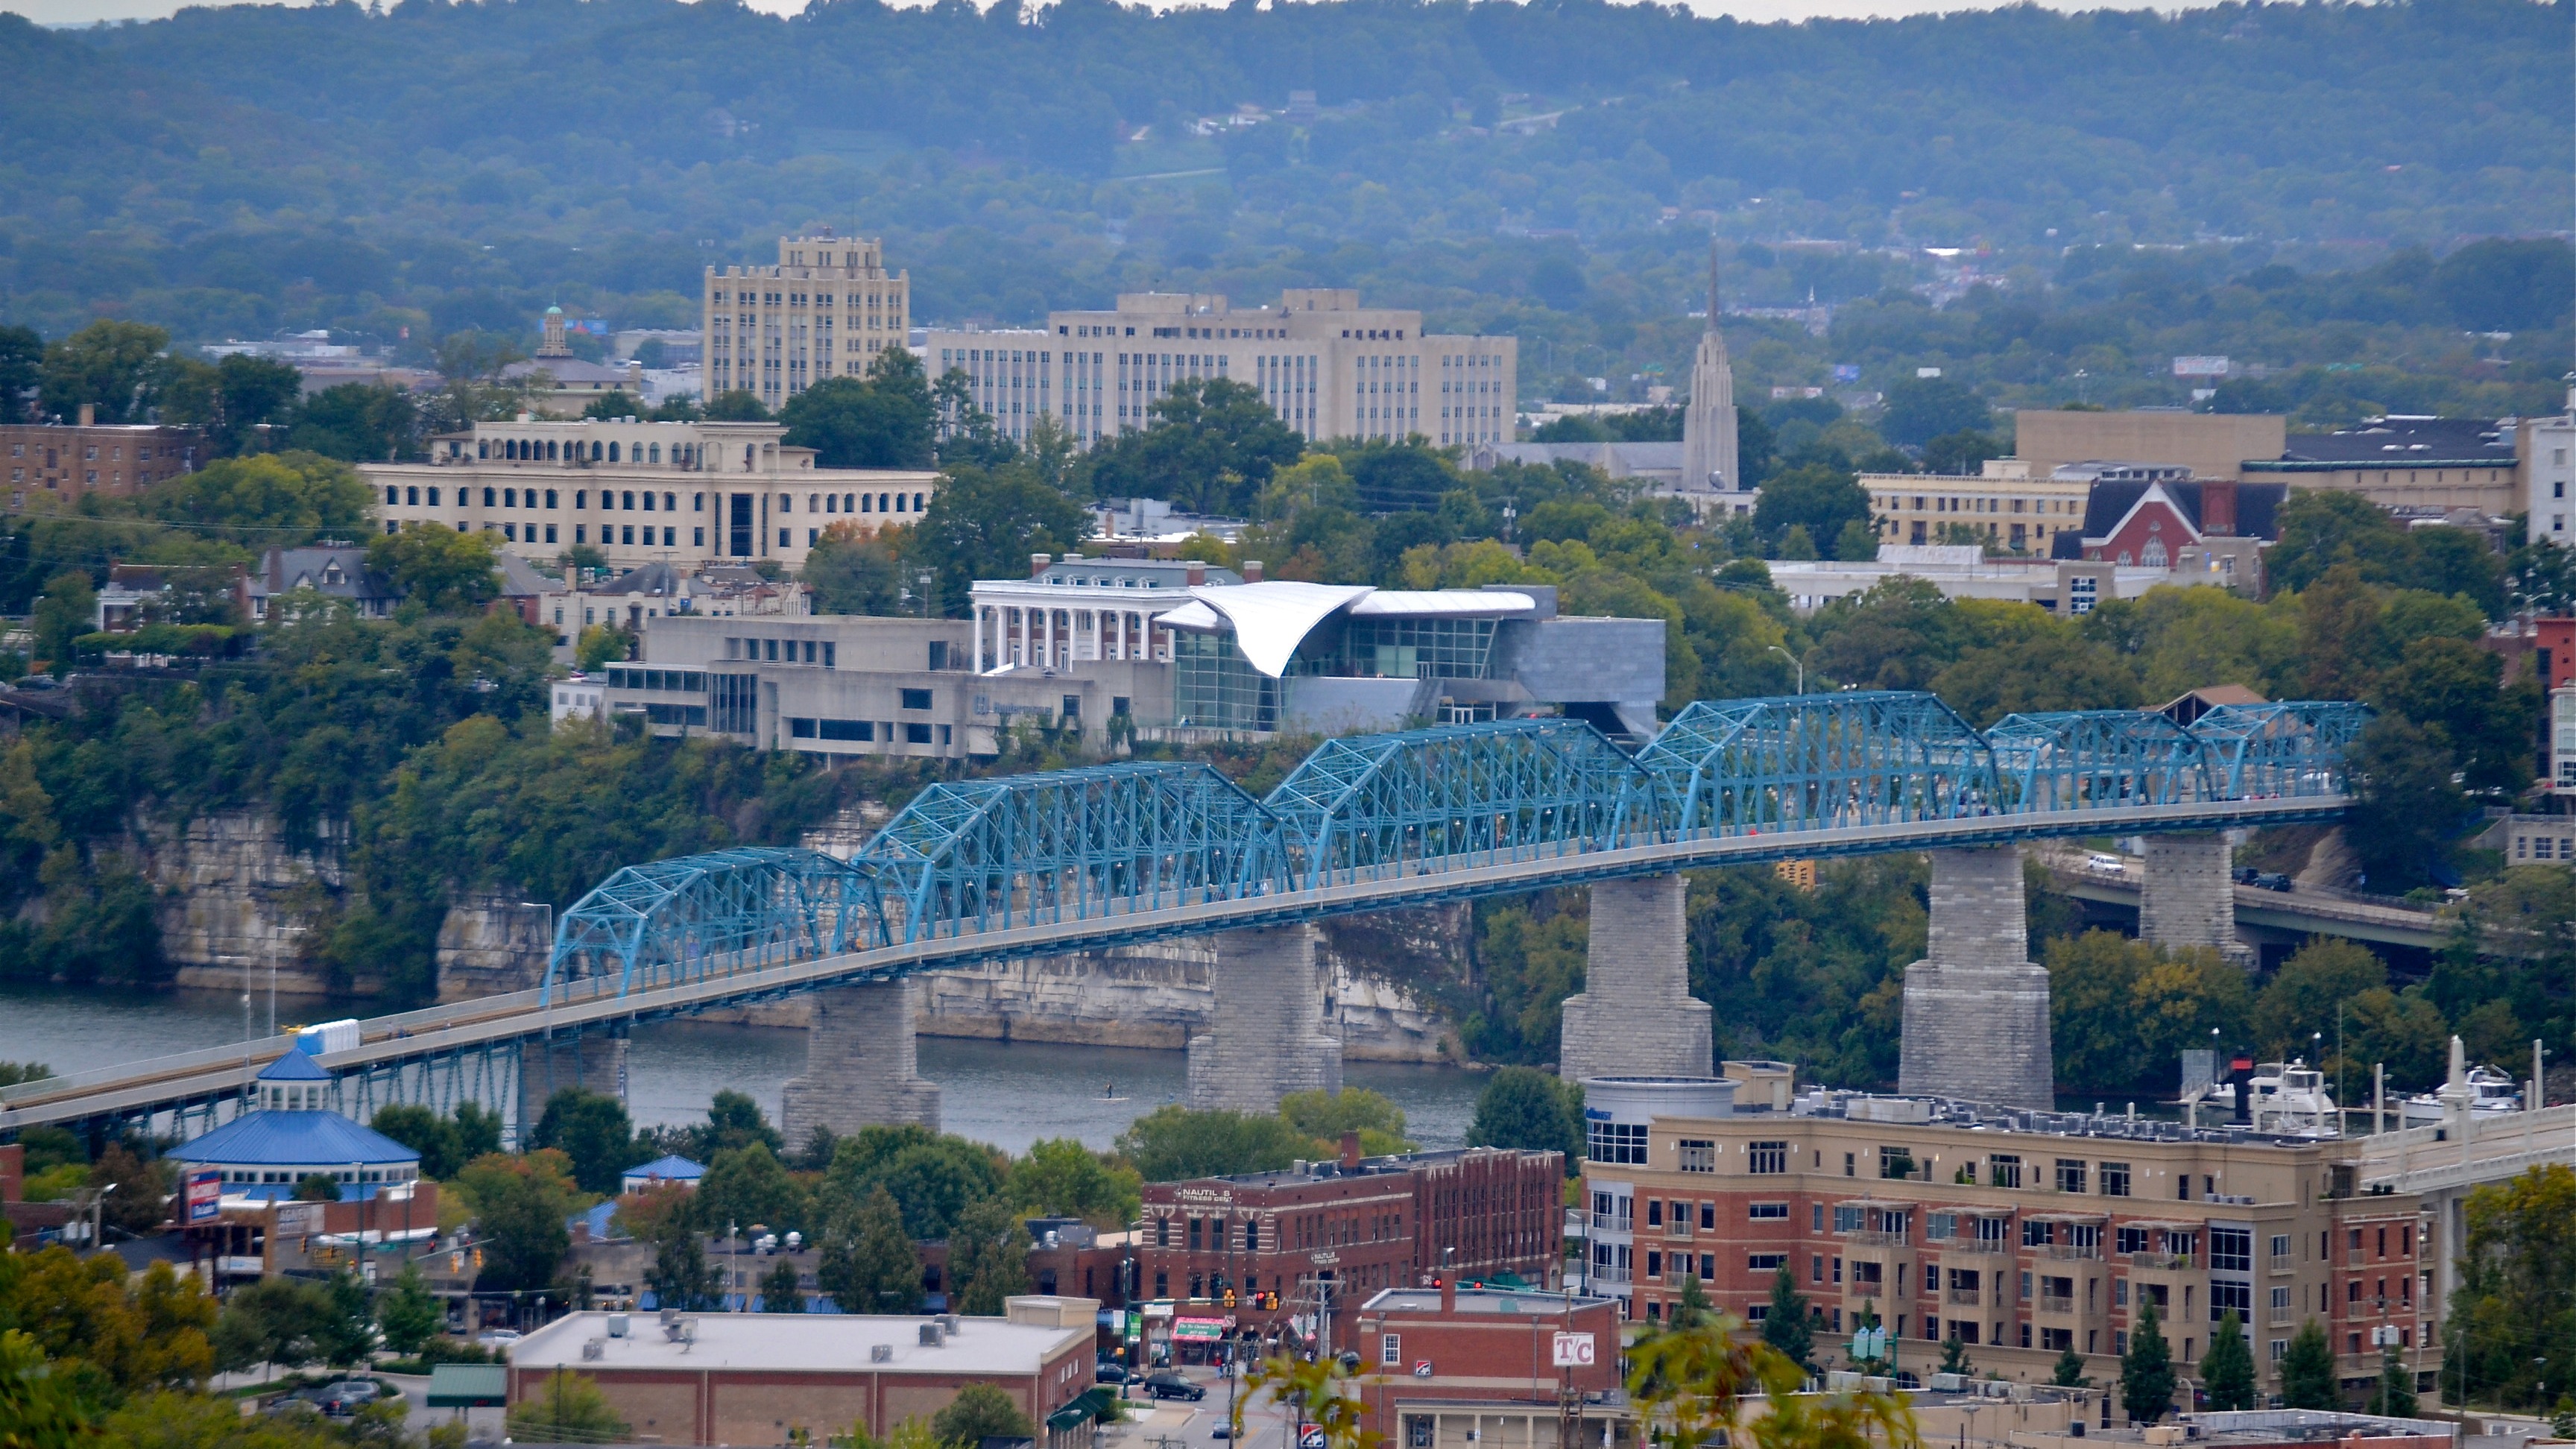 Chattanooga is a city located along the Tennessee River near the southeastern corner of the U.S. state of Tennessee. With an estimated population of 179,139 in 2017,[8] it is the fourth-largest city in Tennessee and one of the two principal cities of East Tennessee, along with Knoxville. Served by multiple railroads and Interstate highways, Chattanooga is a transit hub. Chattanooga lies 120 miles (190 km) northwest of Atlanta, Georgia, 120 miles (190 km) southwest of Knoxville, Tennessee, 135 miles (217 km) southeast of Nashville, Tennessee, 120 miles (190 km) northeast of Huntsville, Alabama, and 148 miles (238 km) northeast of Birmingham, Alabama.